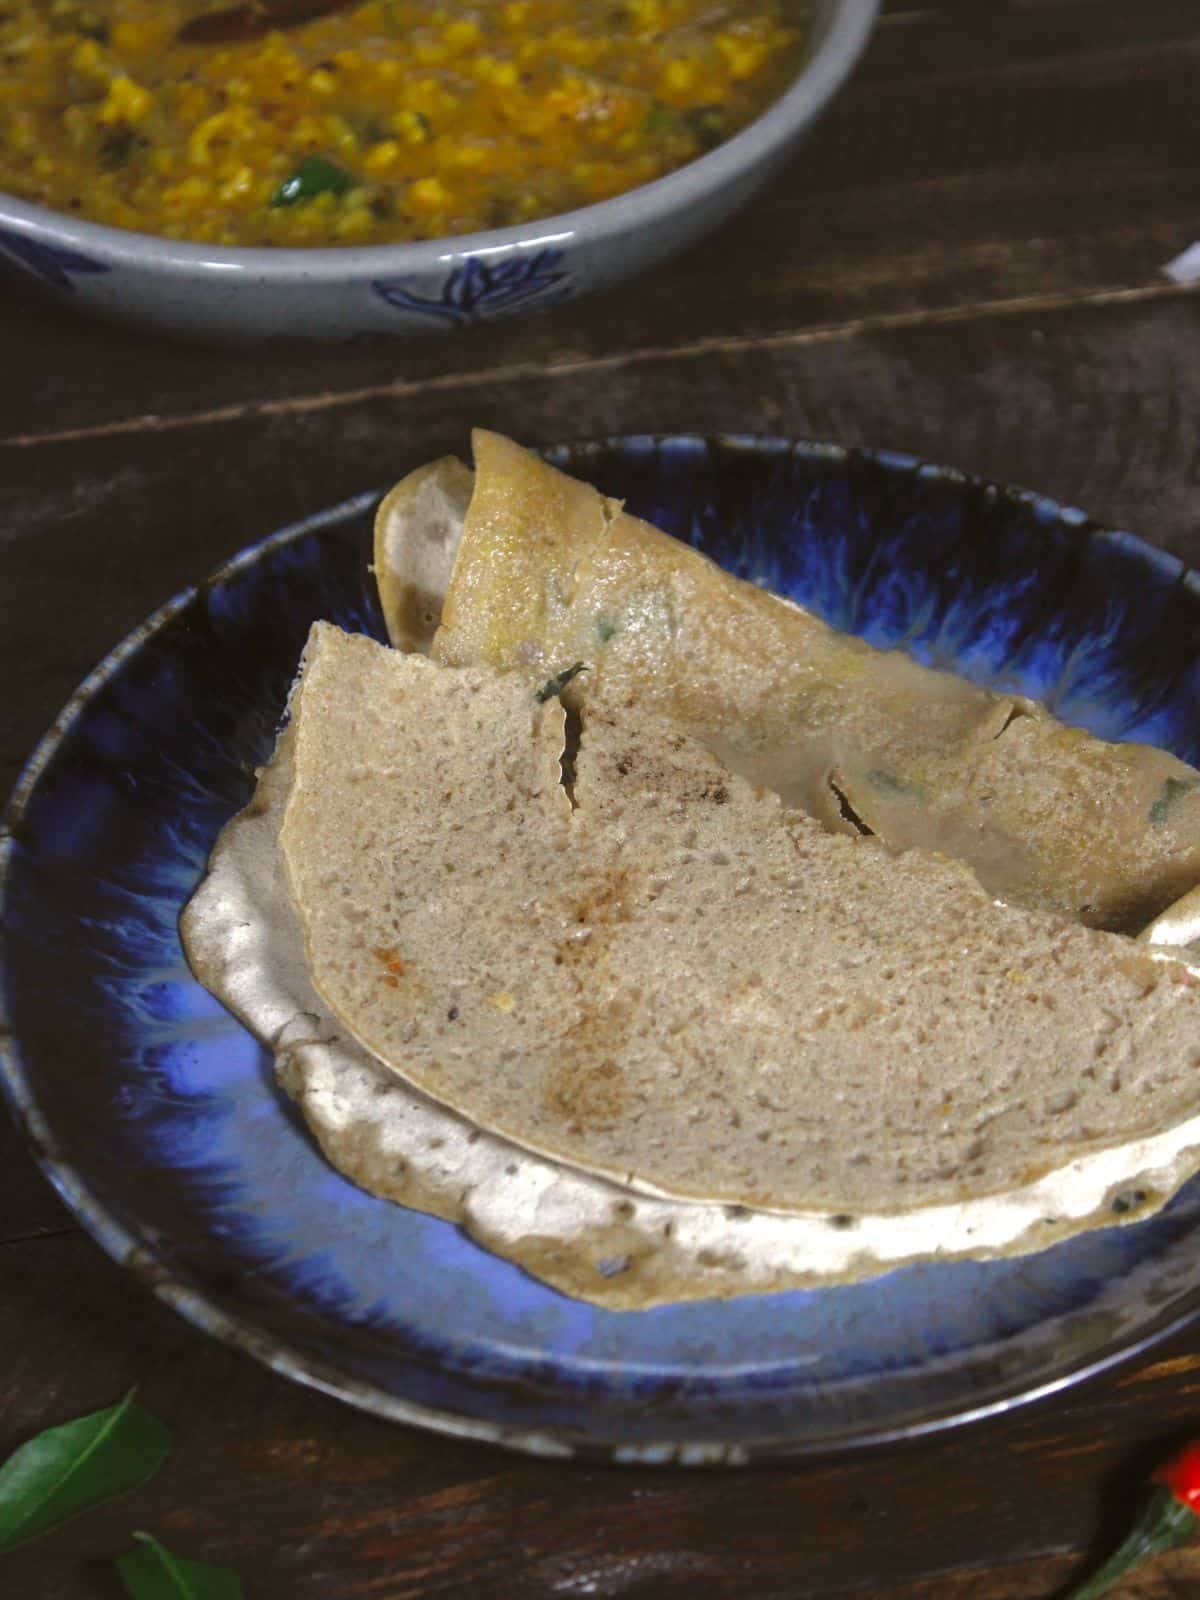 yummy and crunchy foxtail millet dosa ready to enjoy with chutney and sambar